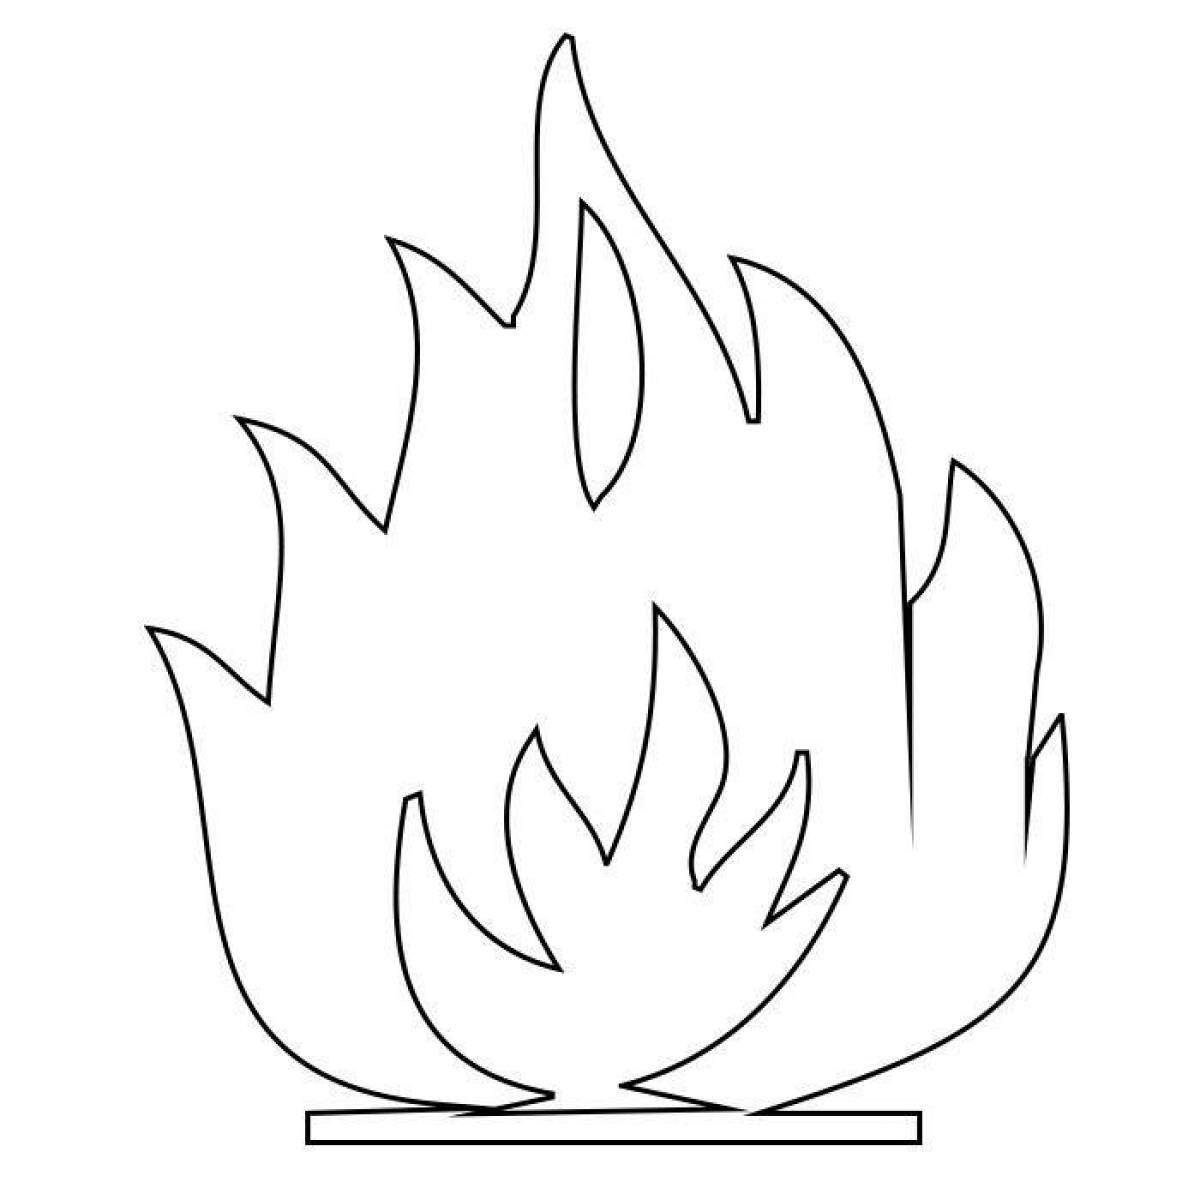 Sparkling fire coloring book